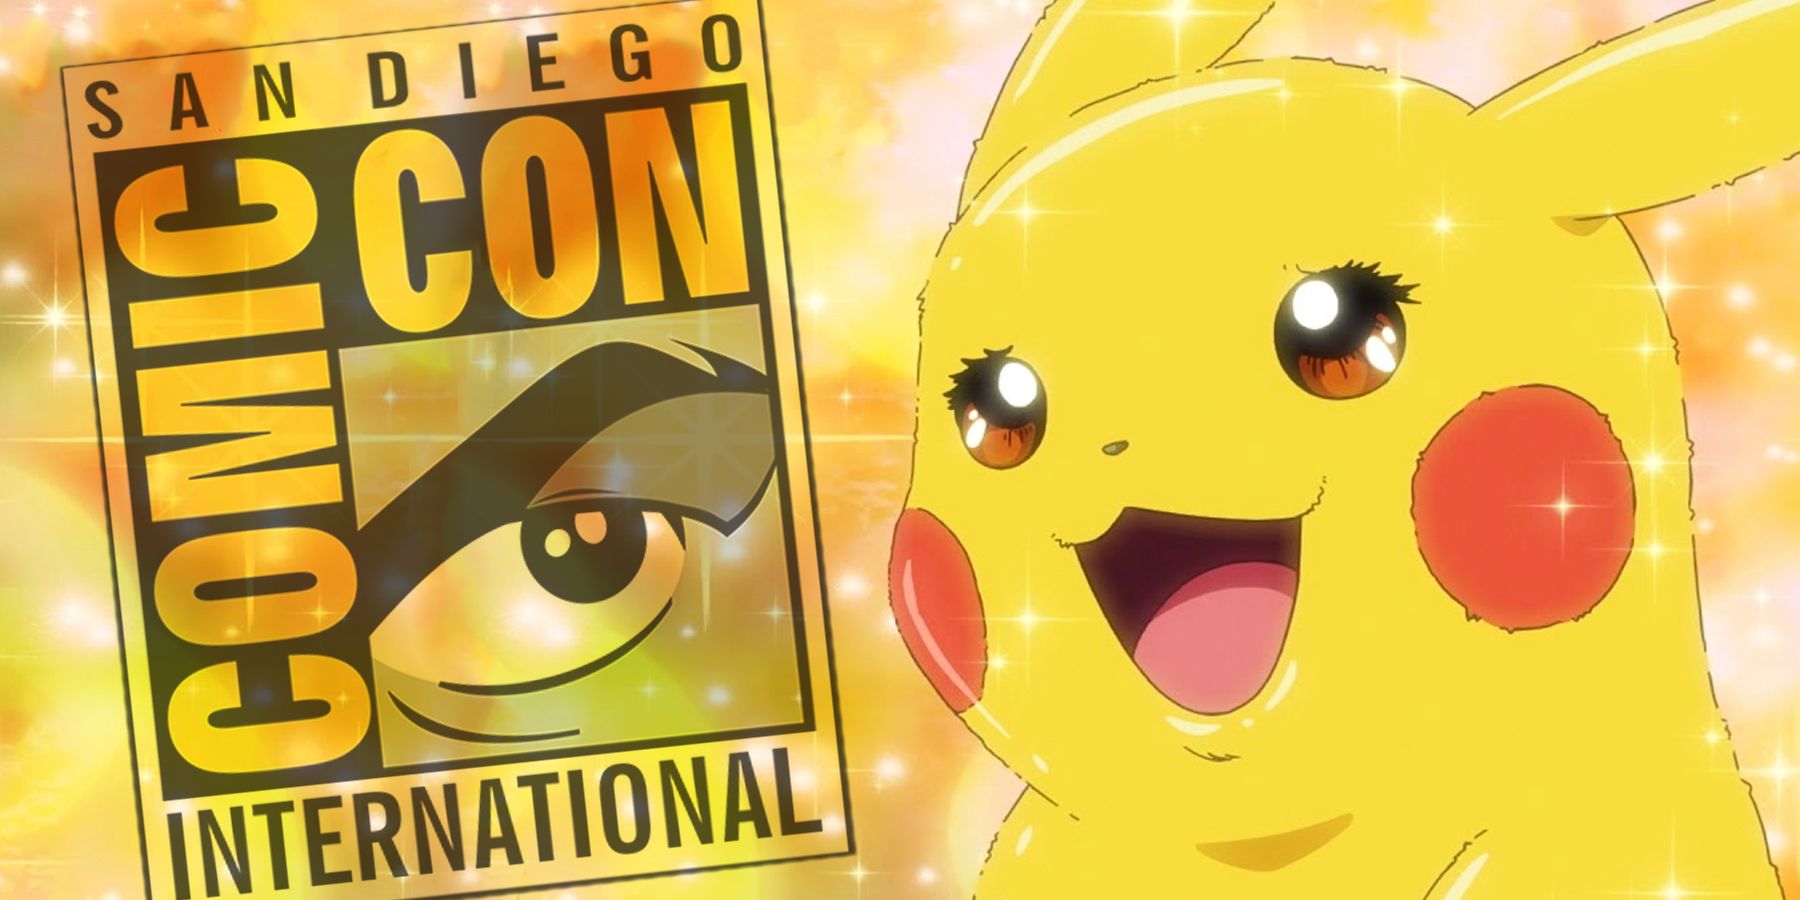 The San Diego Comic-con logo and Pikachu looking happy and surprised from anime Pokémon